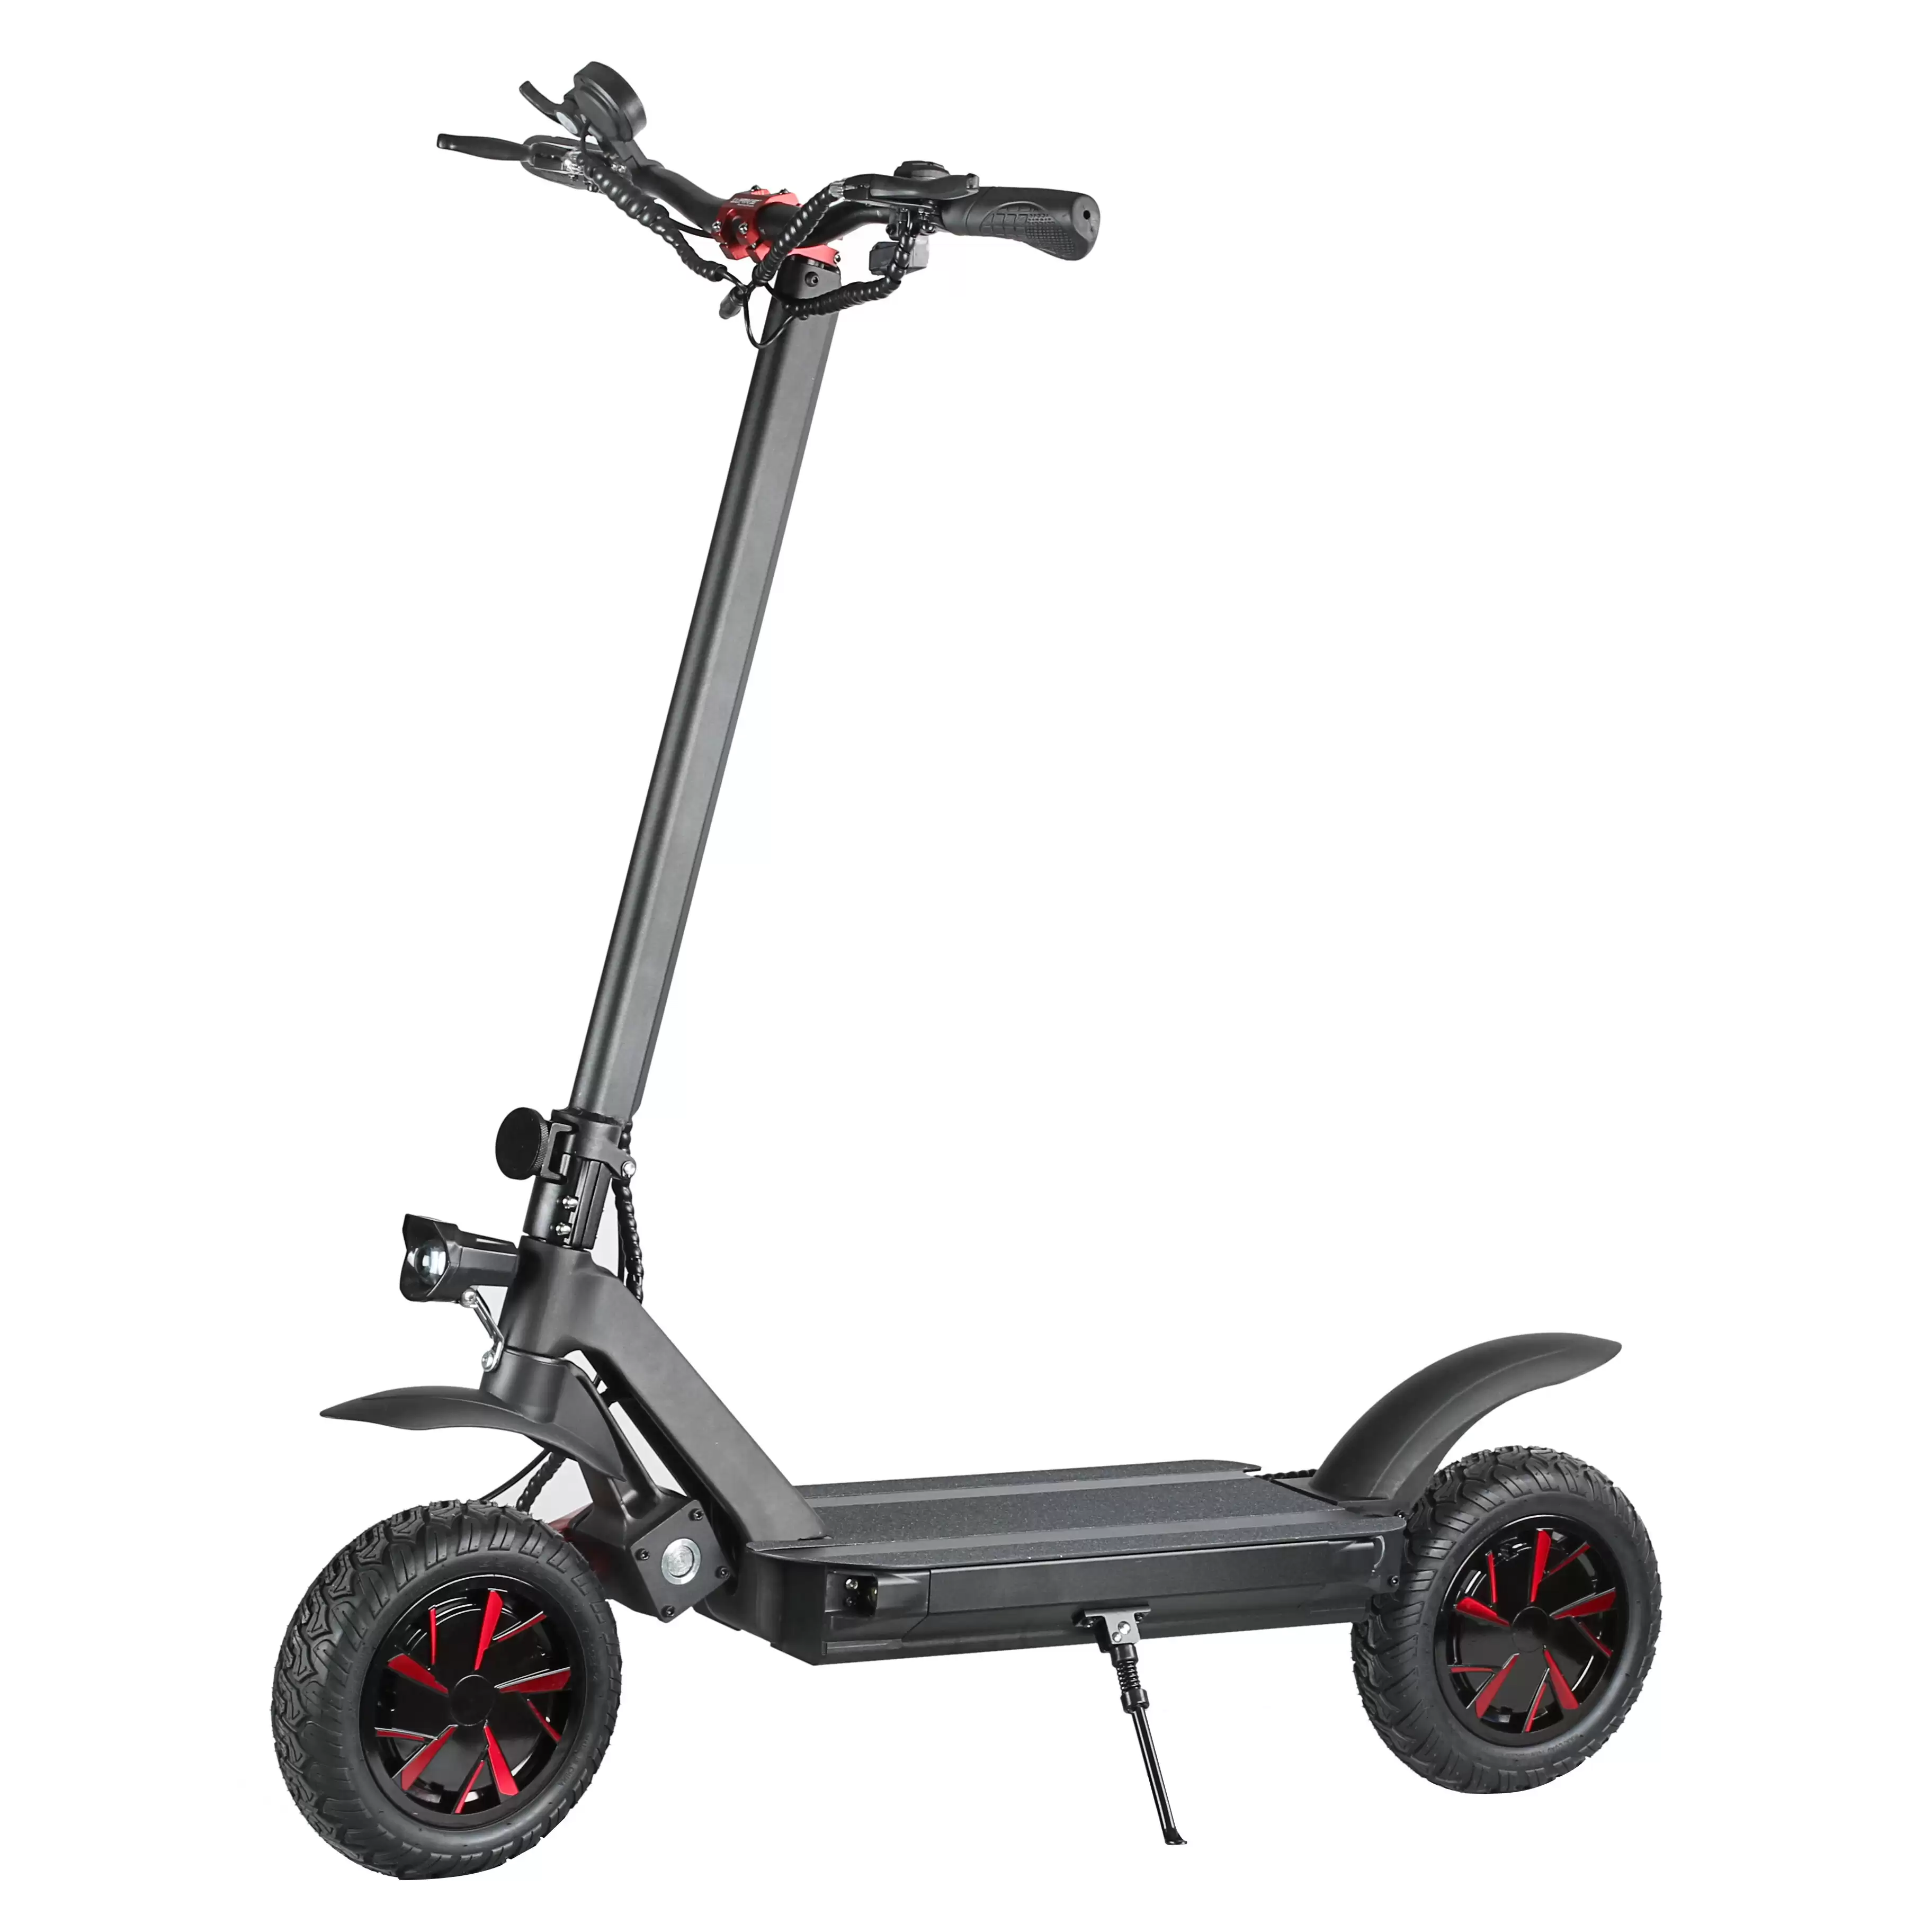 Order In Just $999.99 Eswing Esm8 60v 20.8ah 3600w Dual Motor Folding Electric Scooter 70km/h Top Speed Max Load 150kg 11 Inches Electric Scooter With This Coupon At Banggood